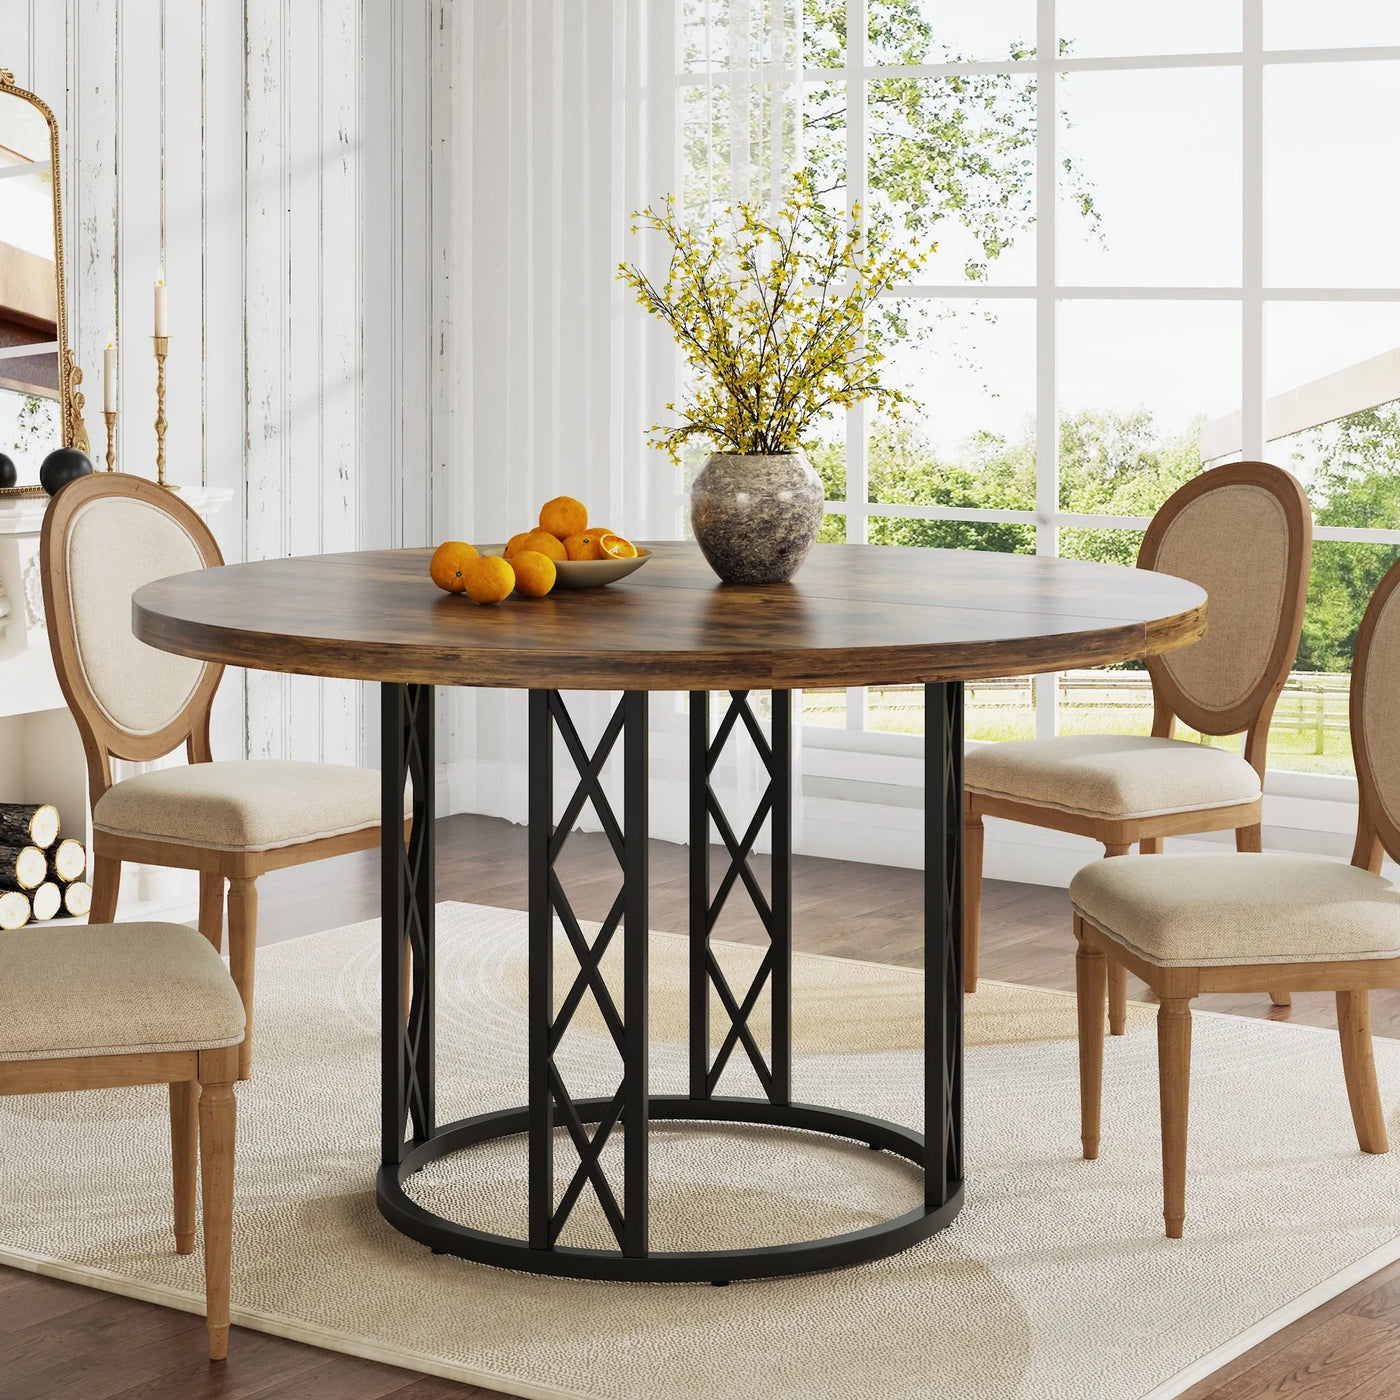 Maurice Round Dining Table for 4 People | 47" Circular Kitchen Table with Metal Base